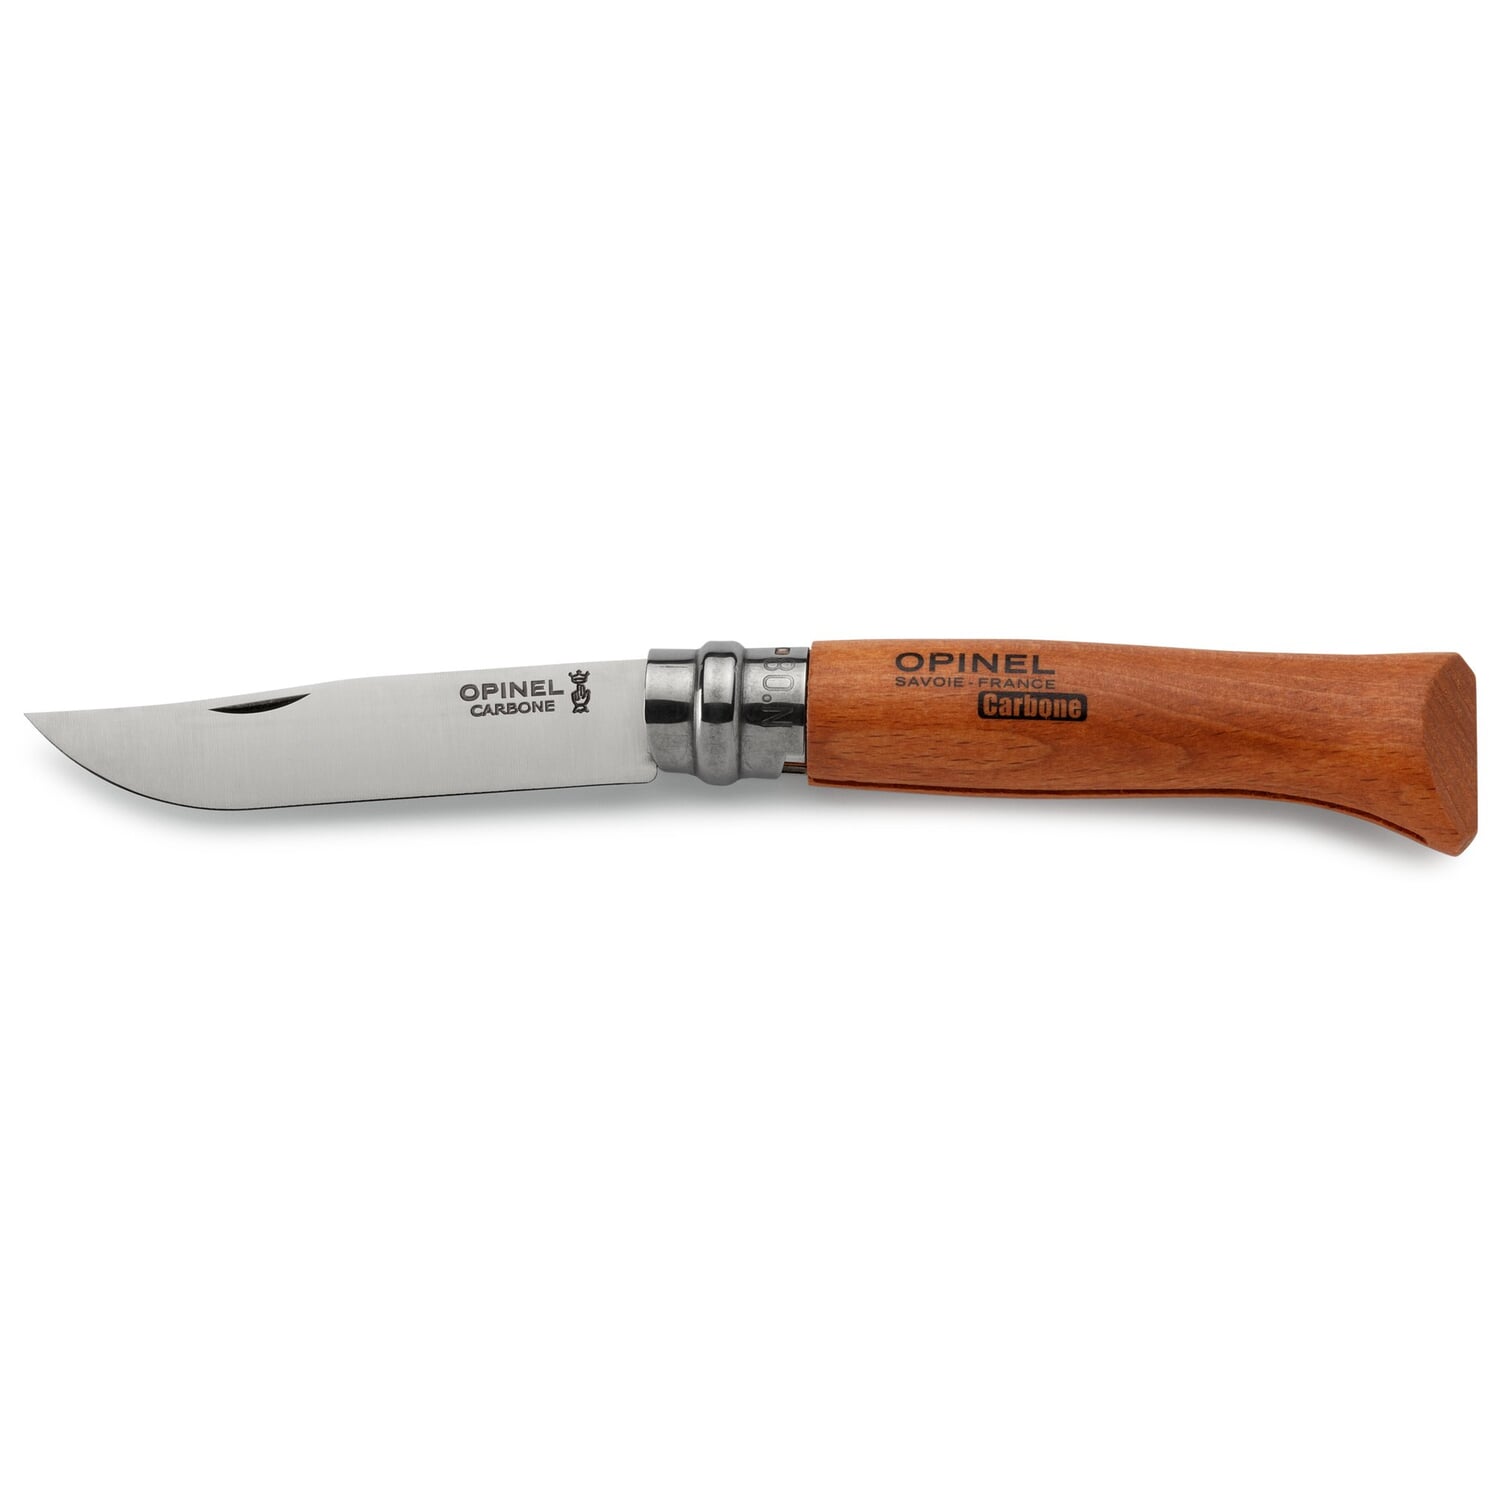 Opinel French folding outdoor hunting camping hiking European knife